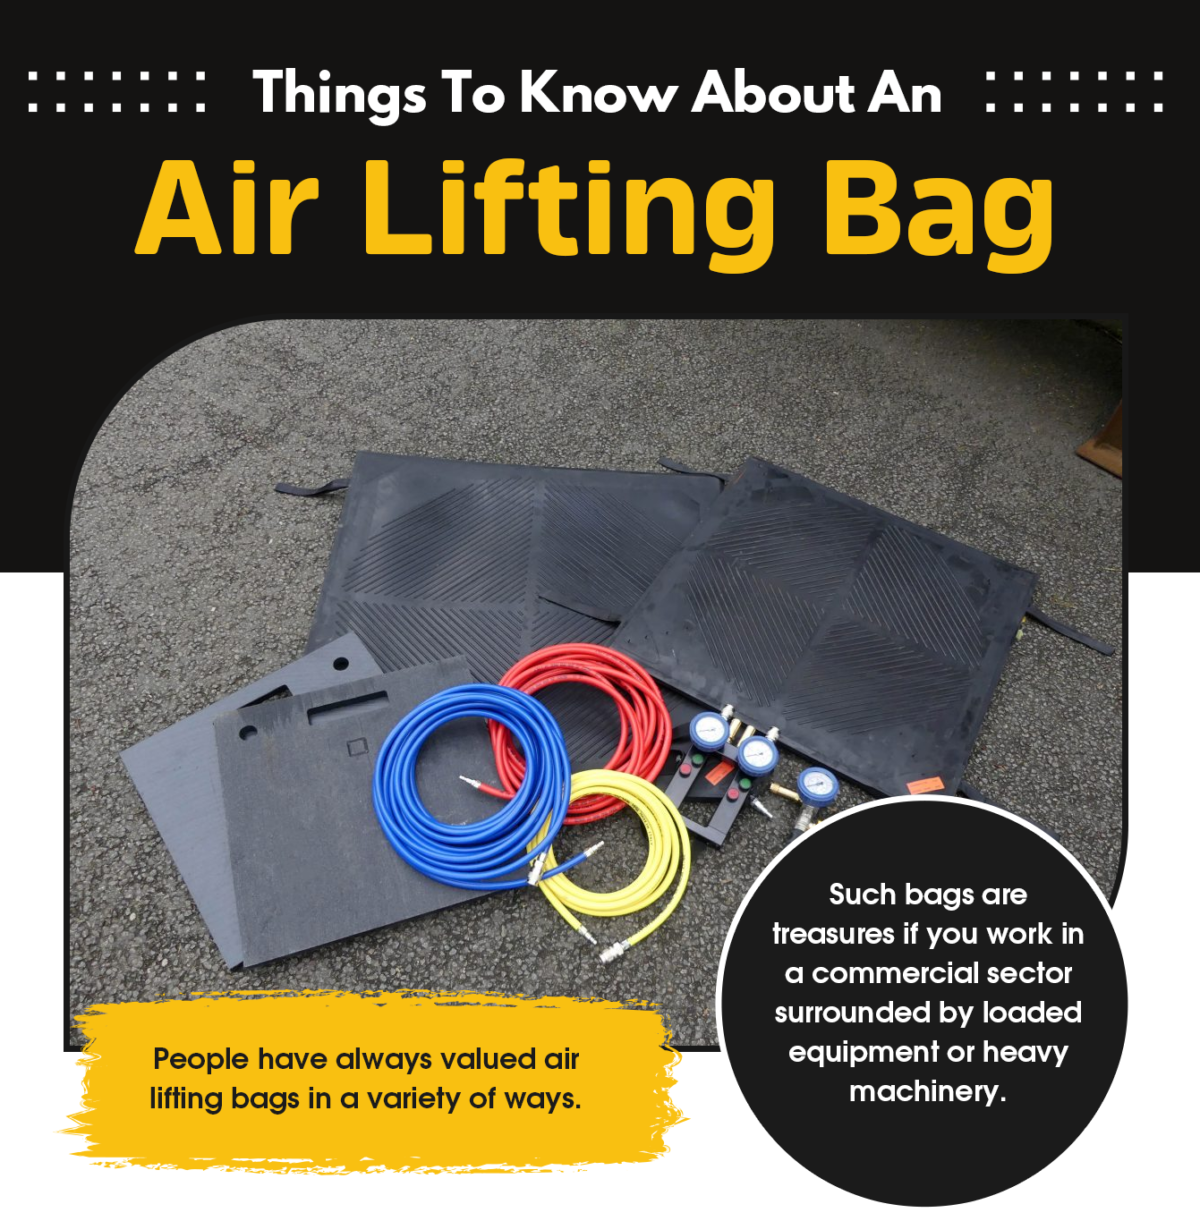 Things To Know About An Air Lifting Bag